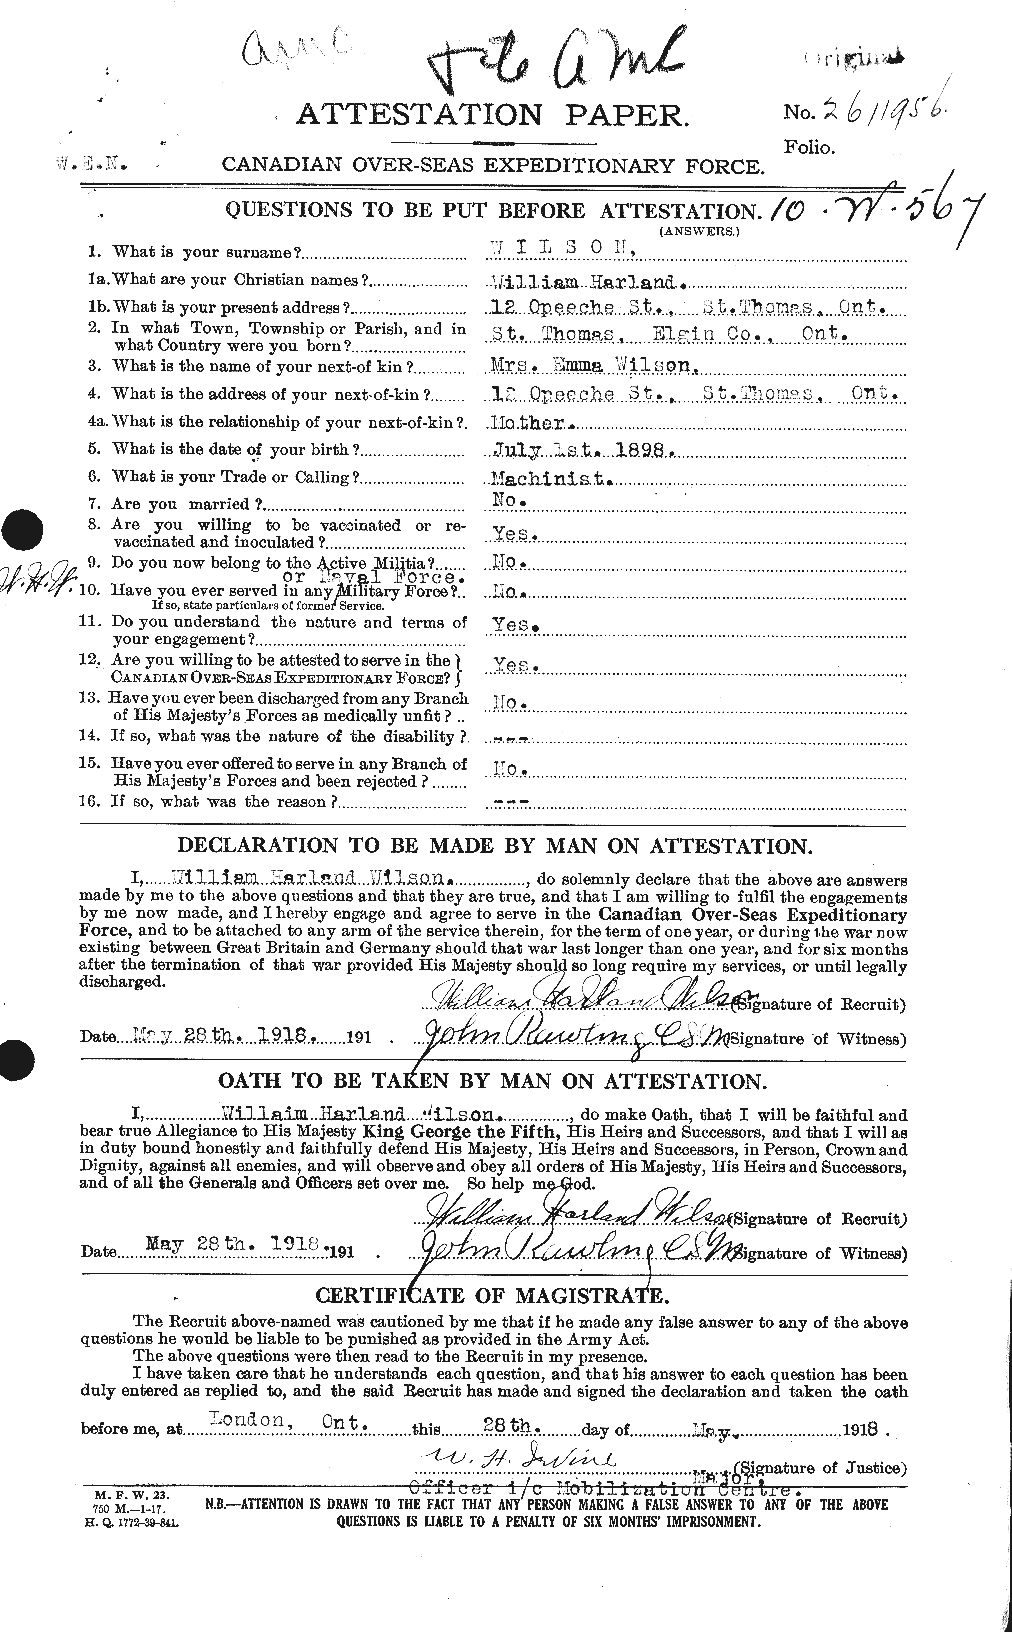 Personnel Records of the First World War - CEF 682010a